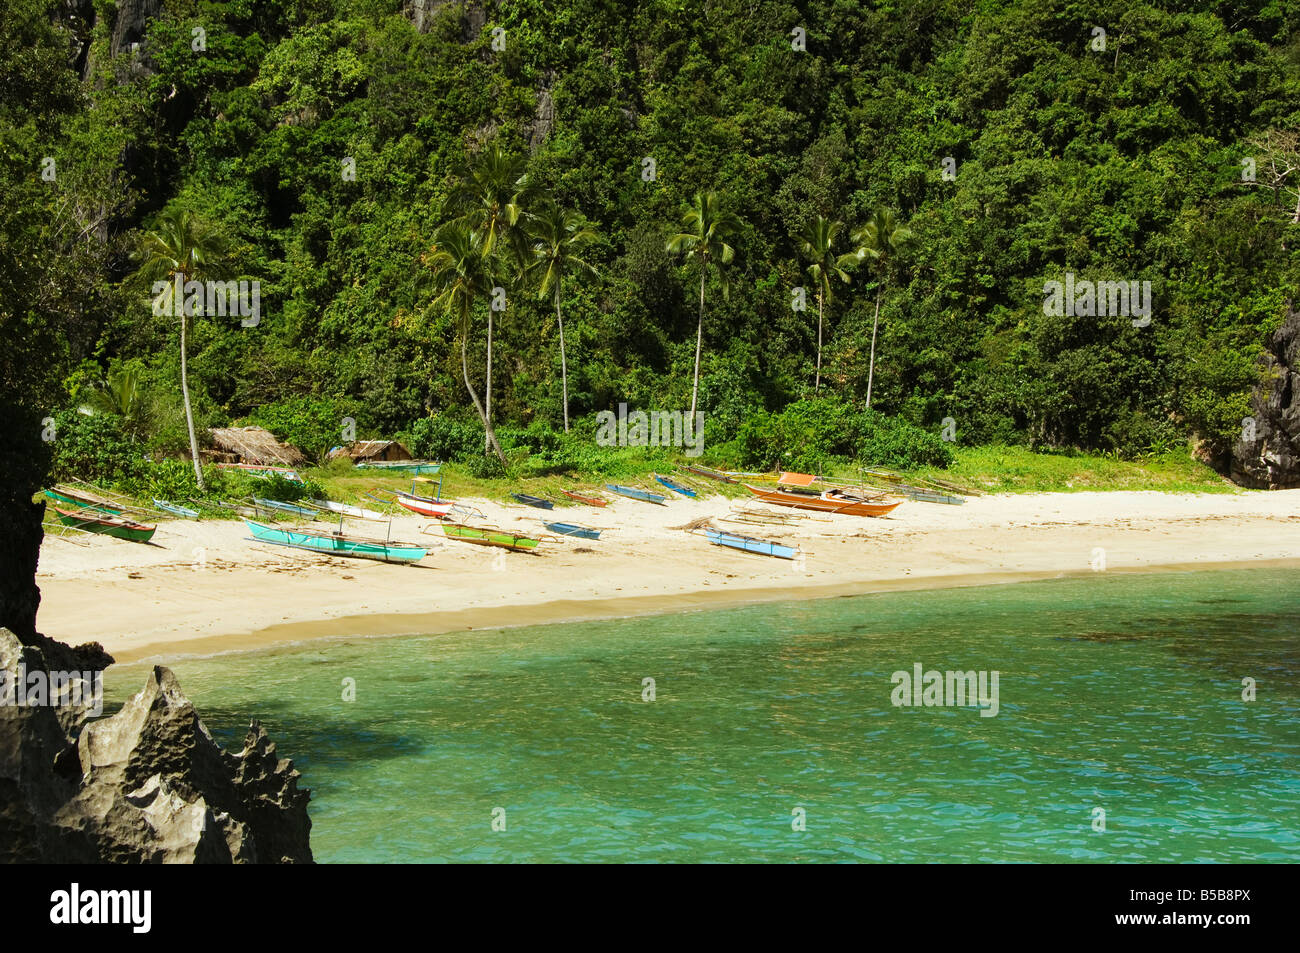 Fishing boats on Gota Beach, Camarines Sur, Caramoan National Park, Bicol Province, southeast Luzon, Philippines, Southeast Asia Stock Photo